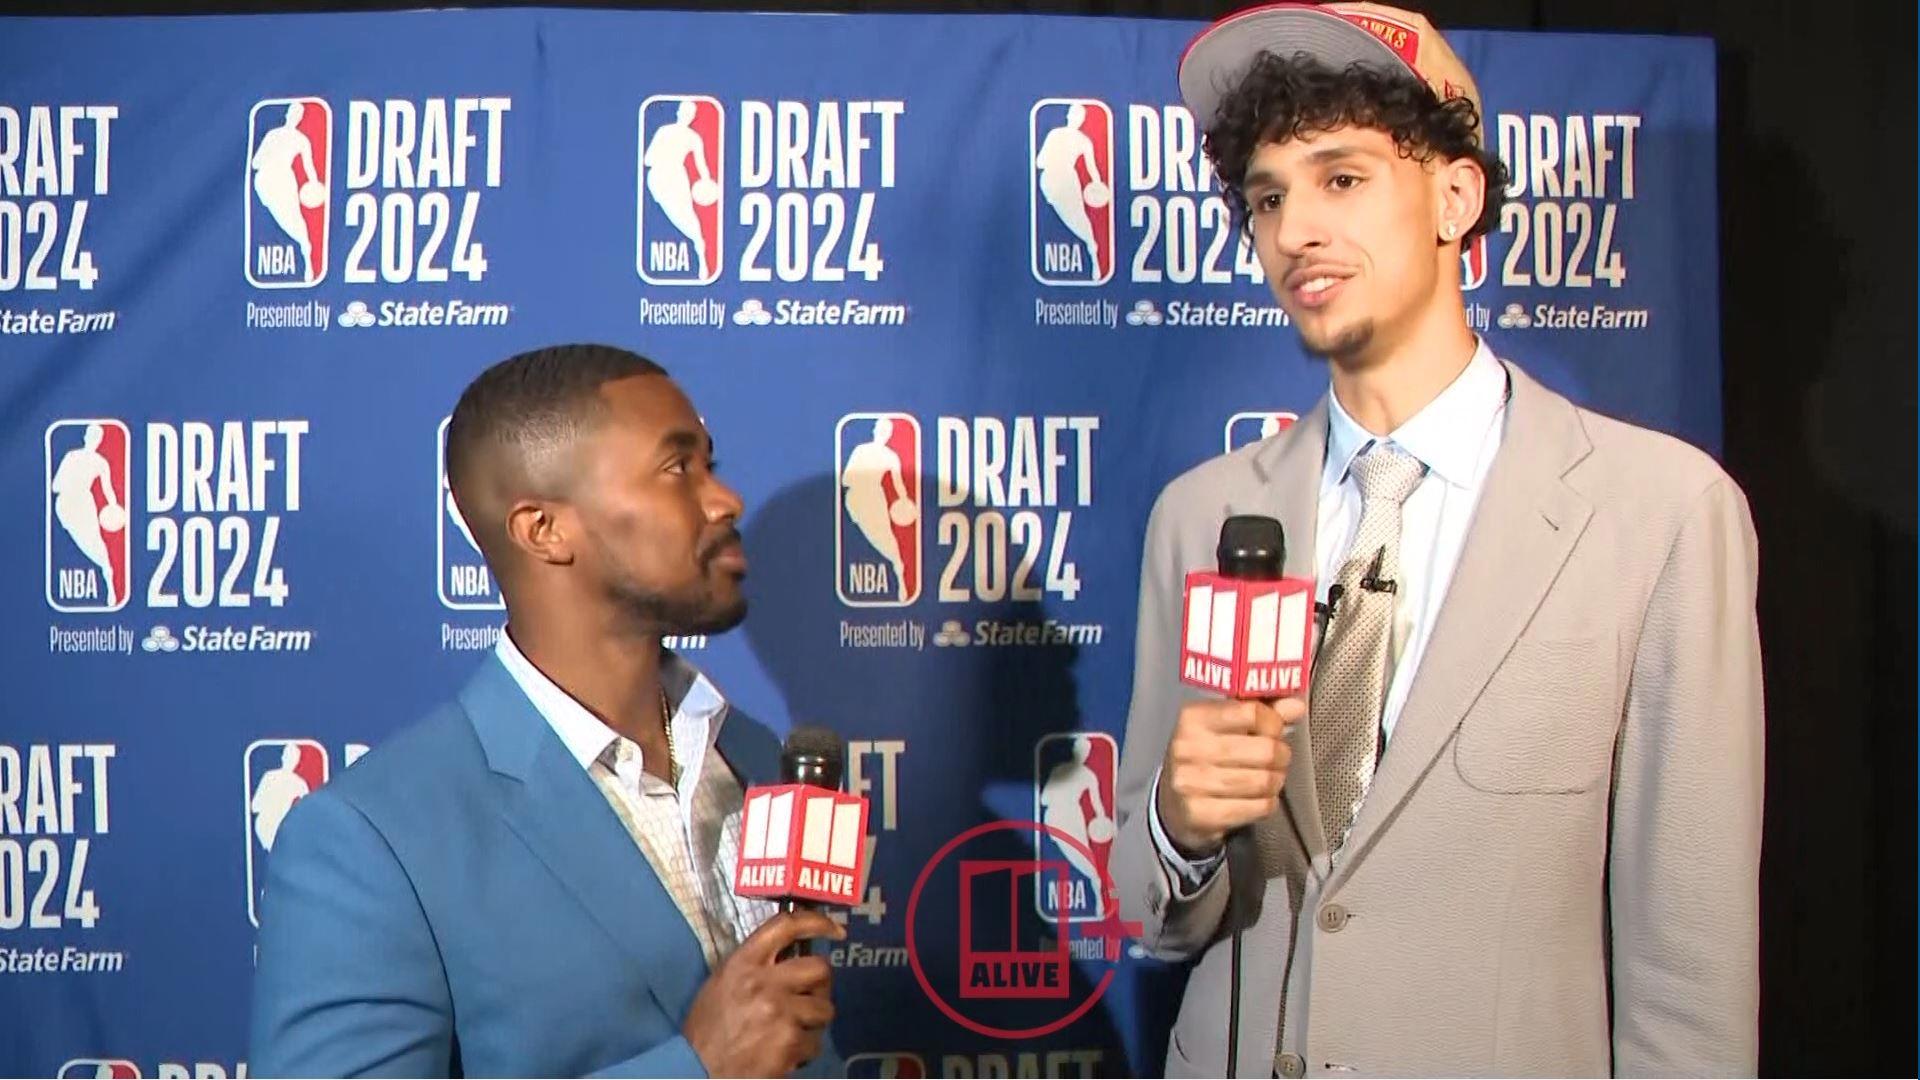 Zaccharie Risacher became the first No. 1 overall pick for the Atlanta Hawks in the NBA Draft lottery era.